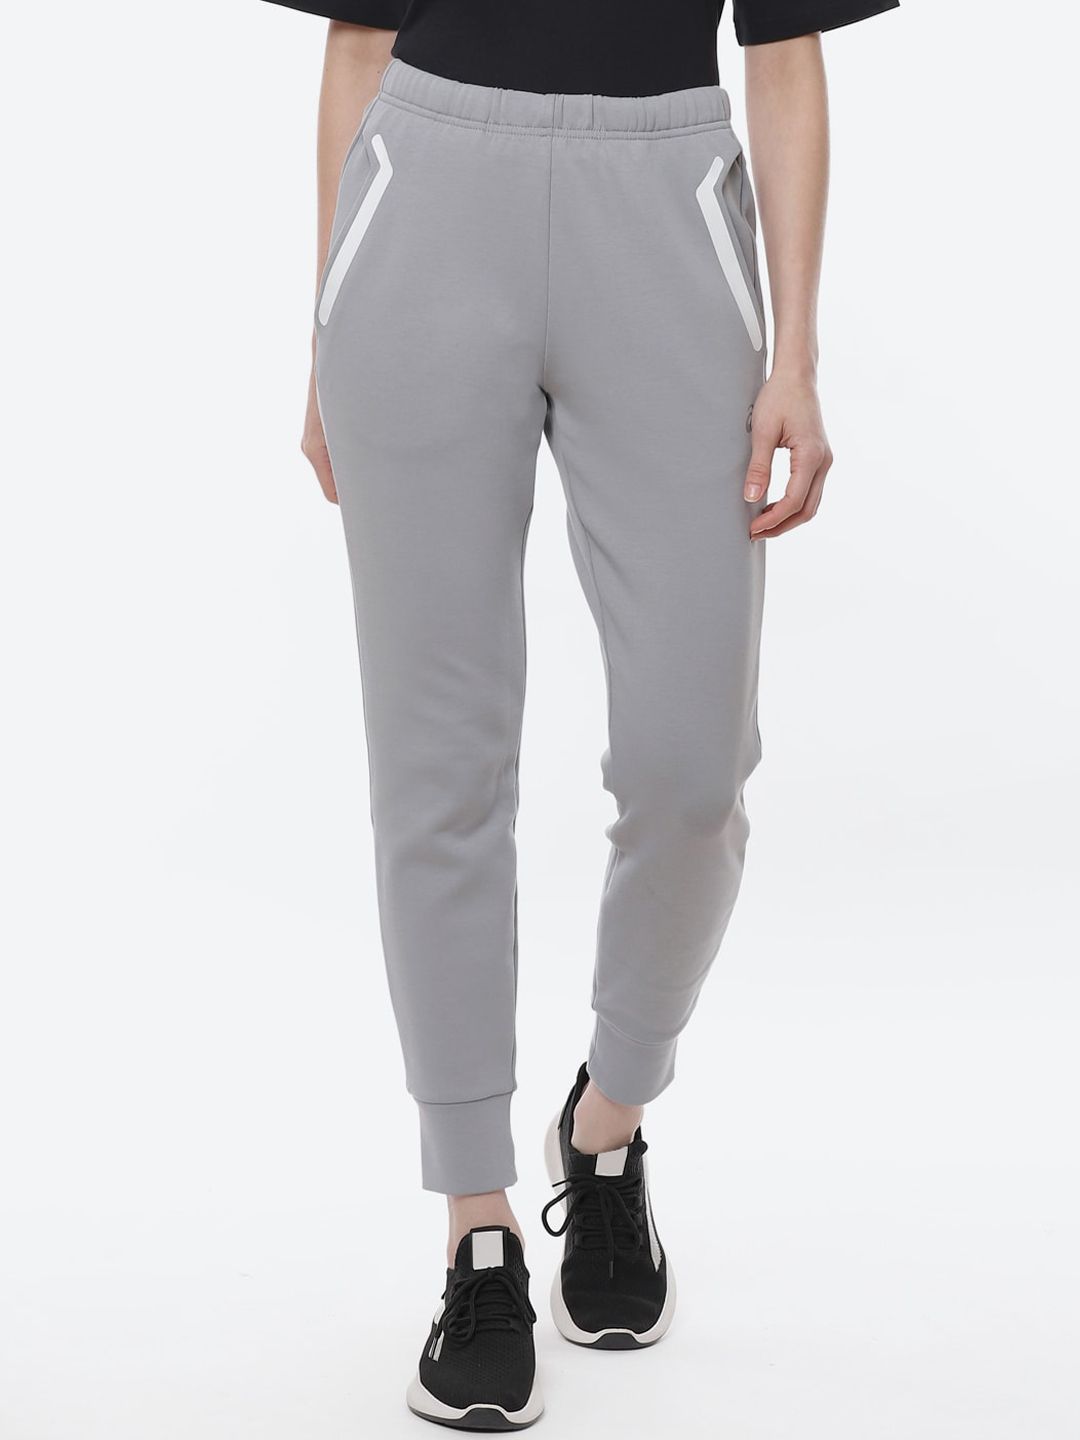 ASICS Women Grey Solid Tech Knit Tapered Joggers Price in India